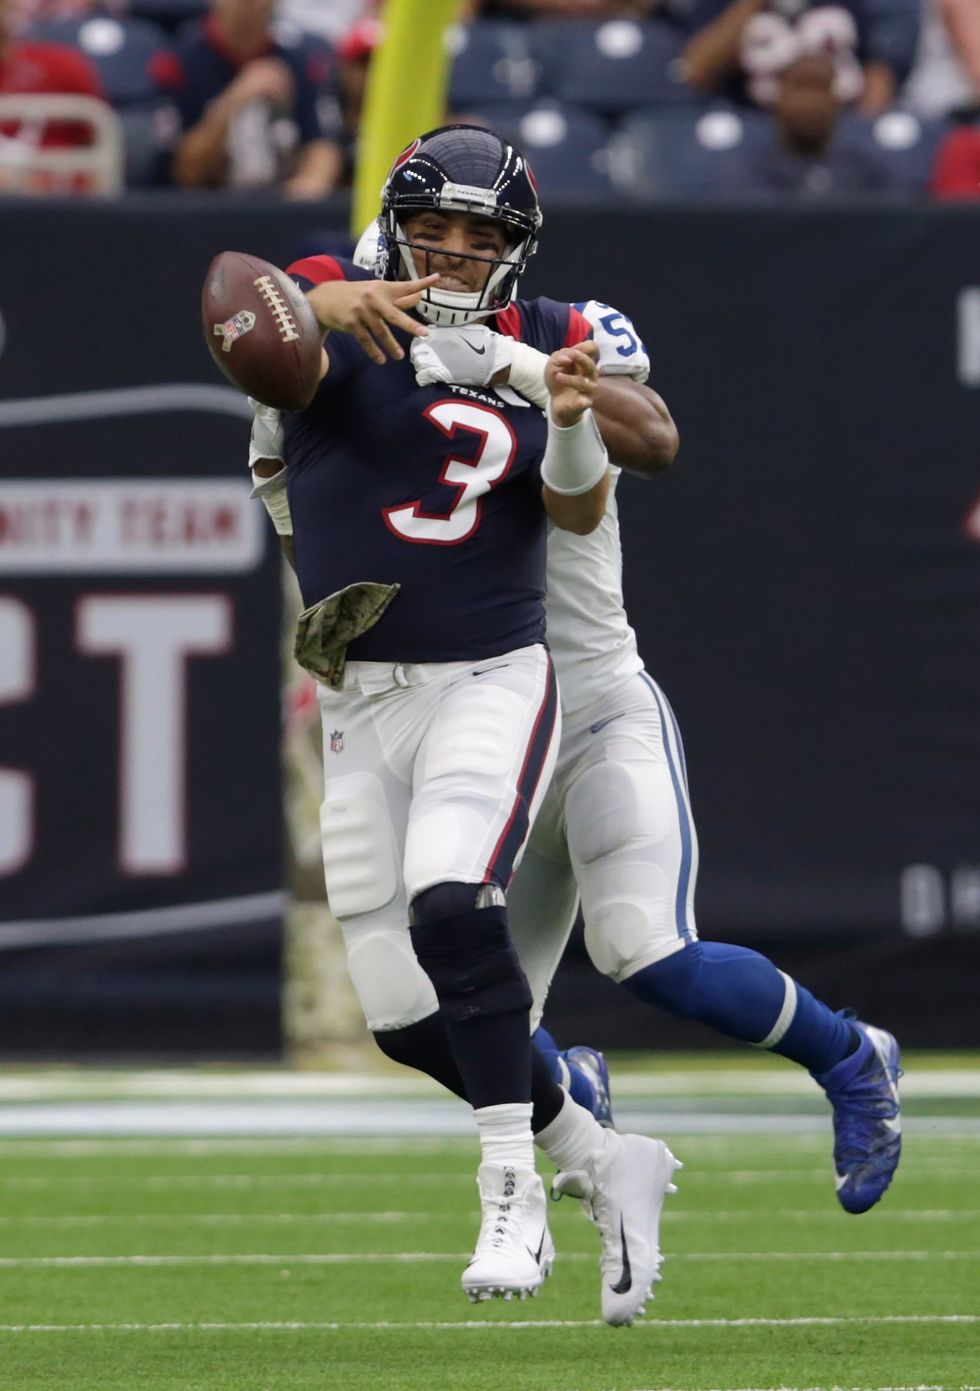 Texans rally comes up short in 20-14 loss to Colts